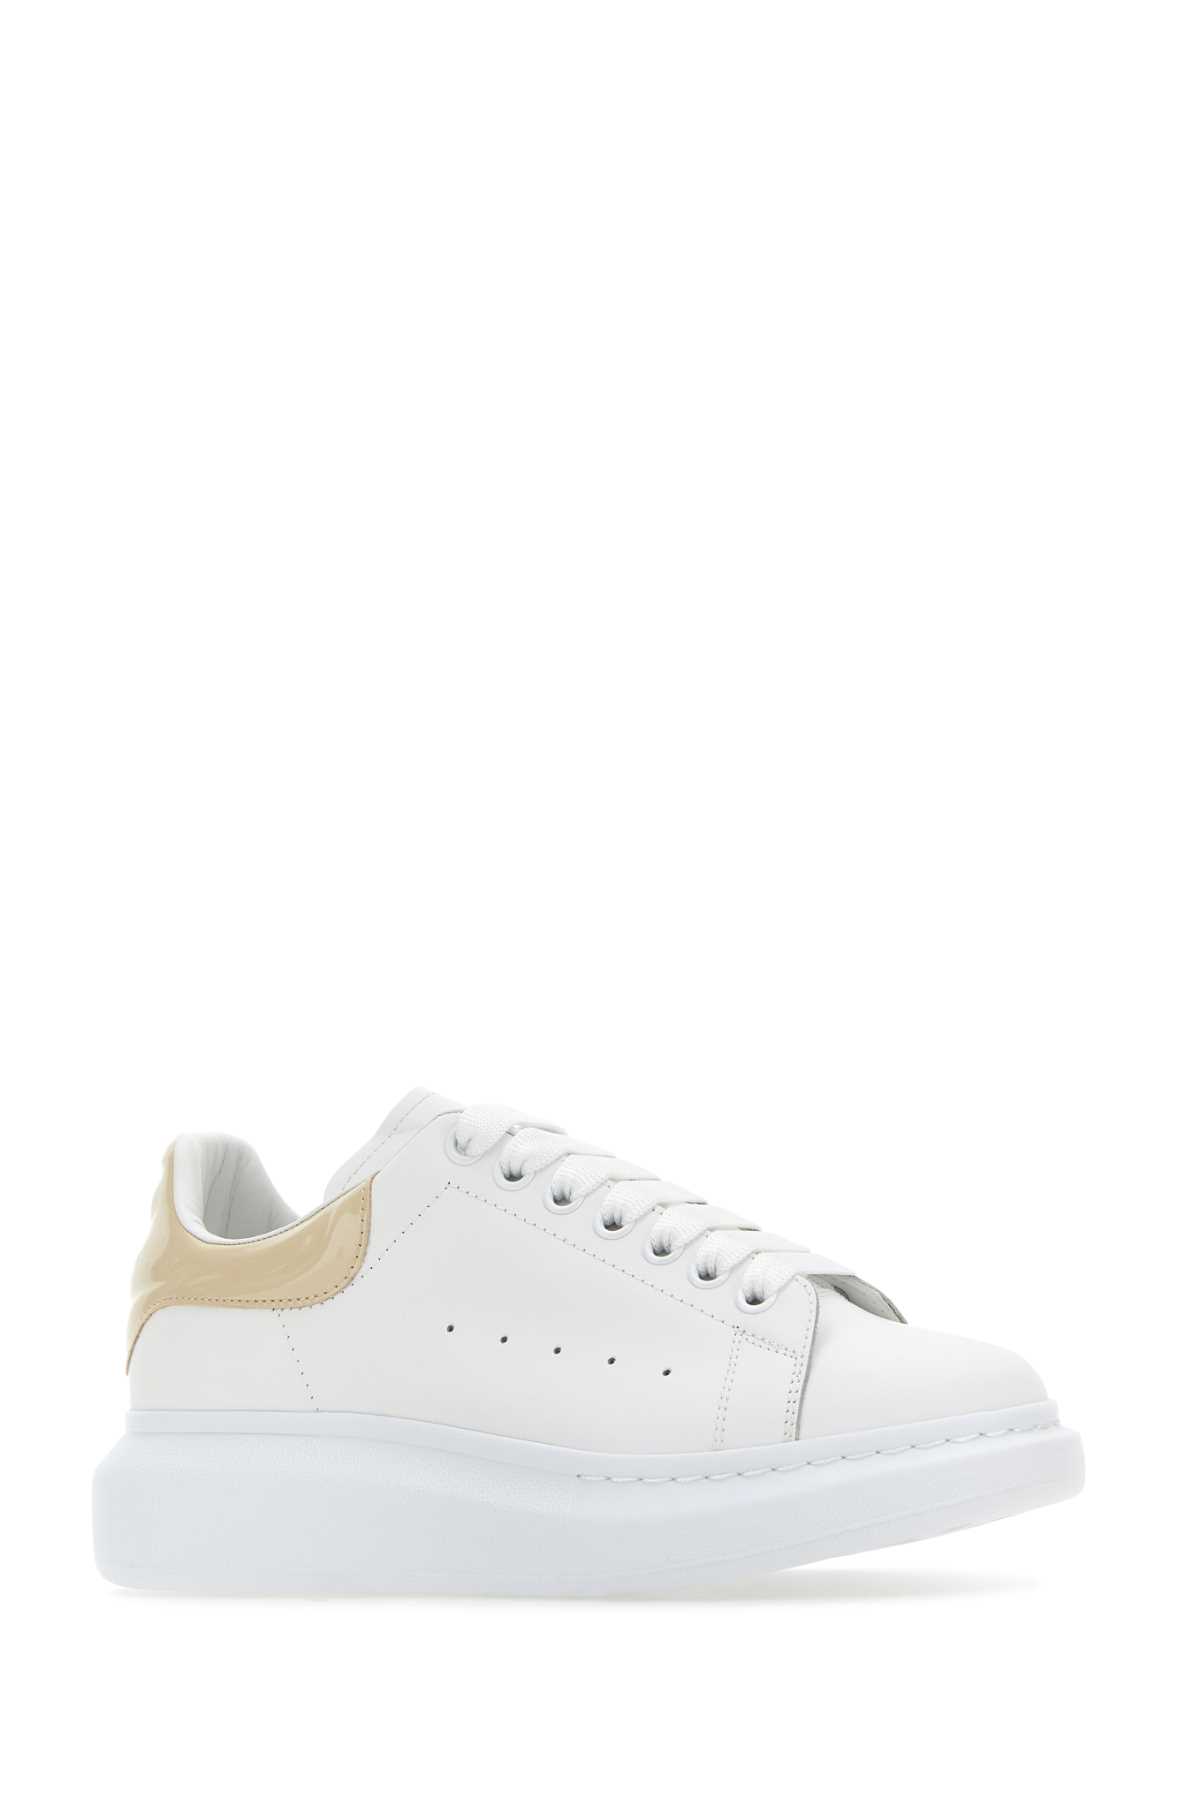 Alexander Mcqueen White Leather Sneakers With Grey Leather Heel In Whiteoyster